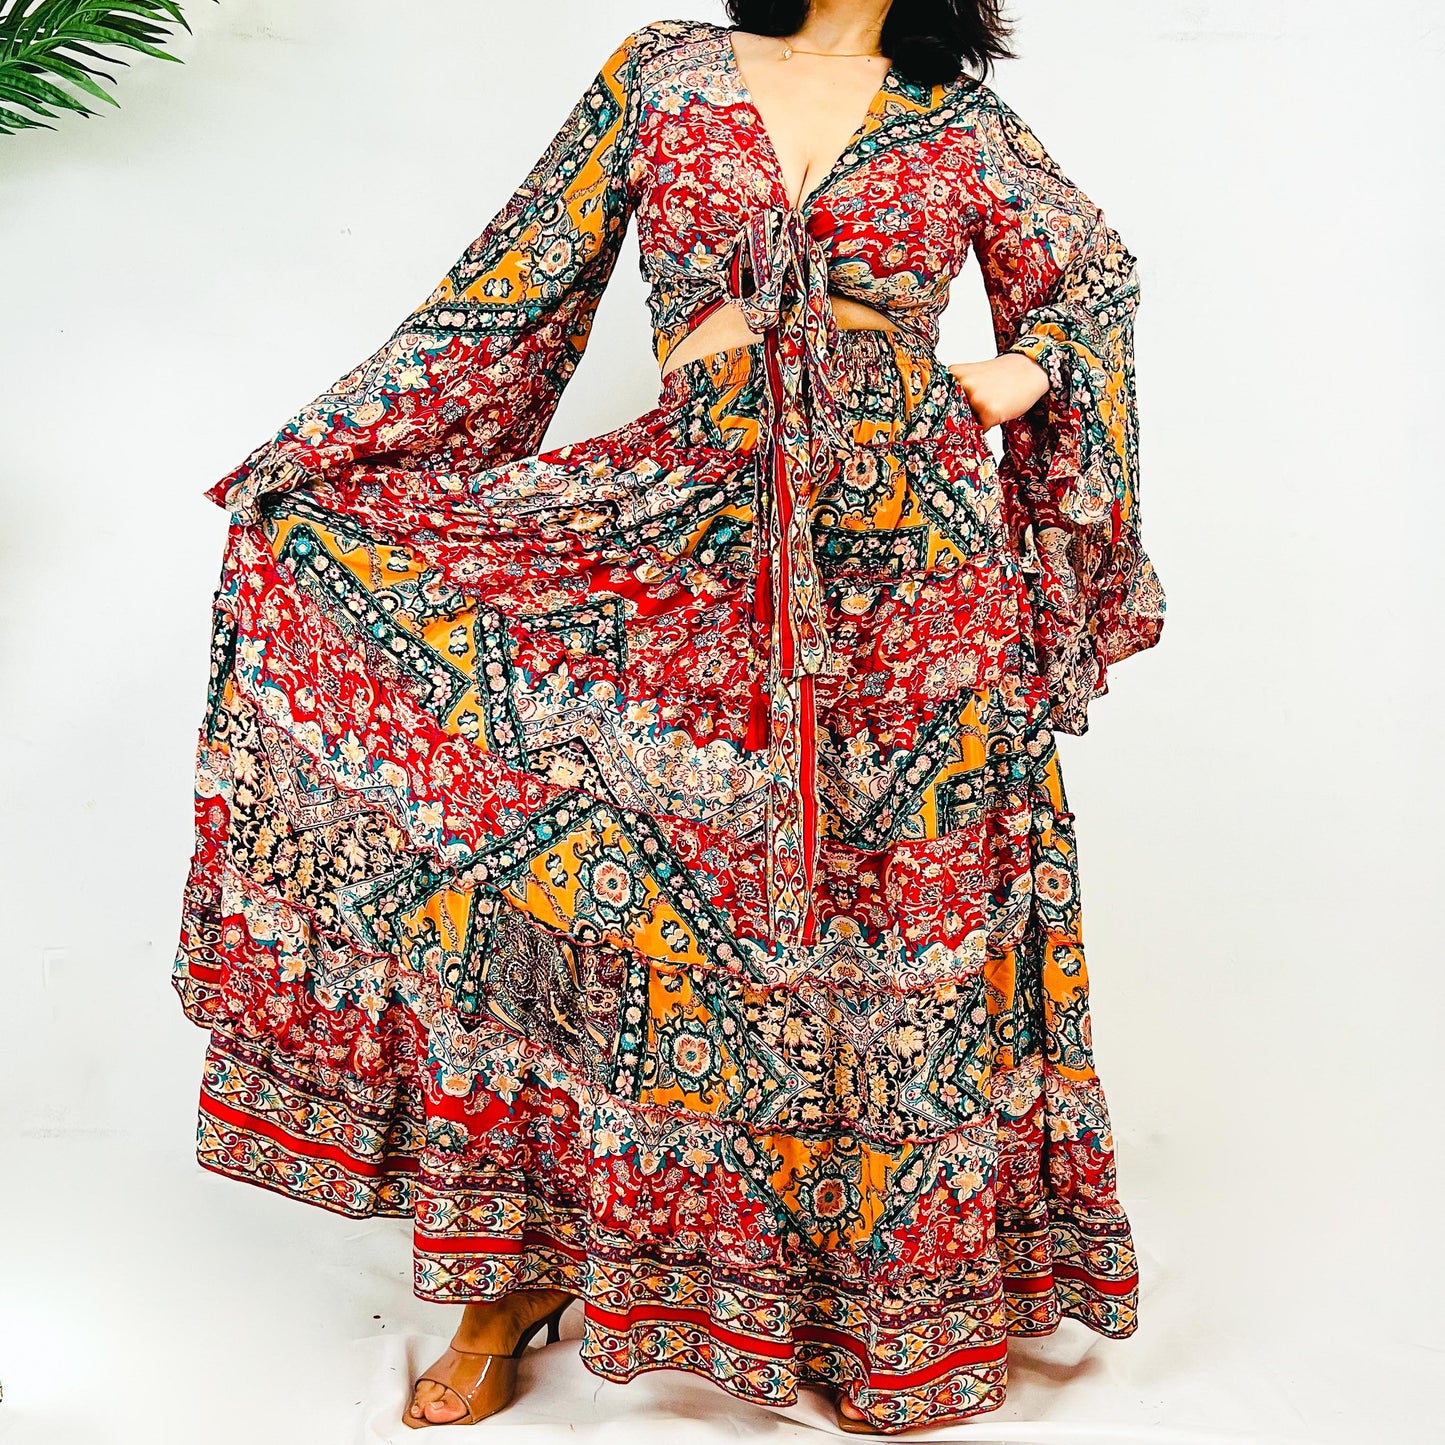 70s Style Boho Skirt with Bell Sleeve Top